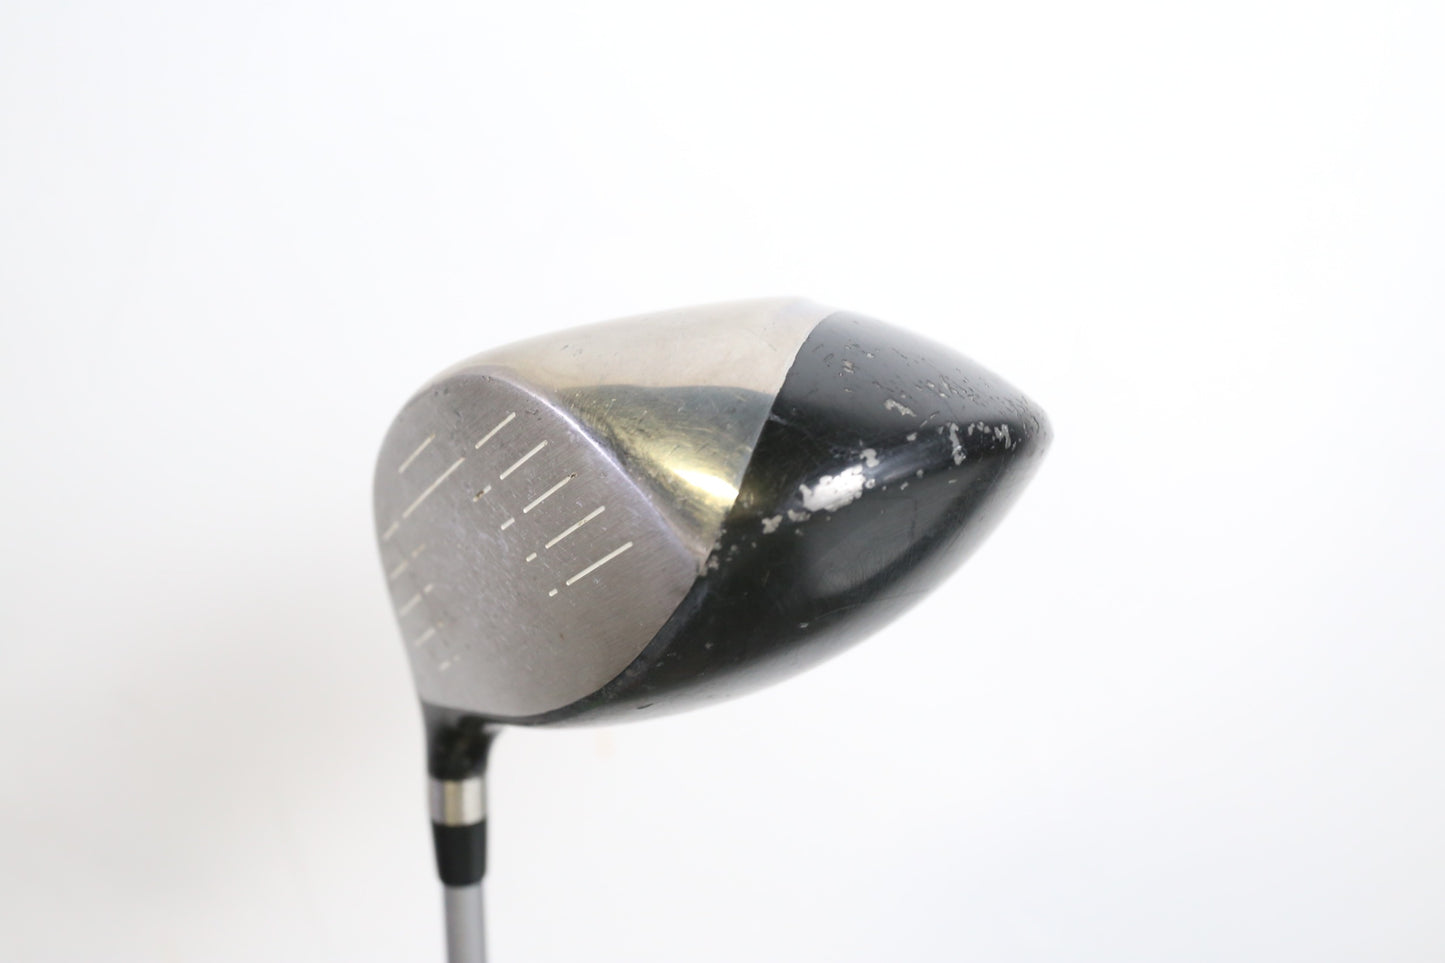 Used Ping Rapture Driver - Right-Handed - 10.5 Degrees - Seniors Flex-Next Round